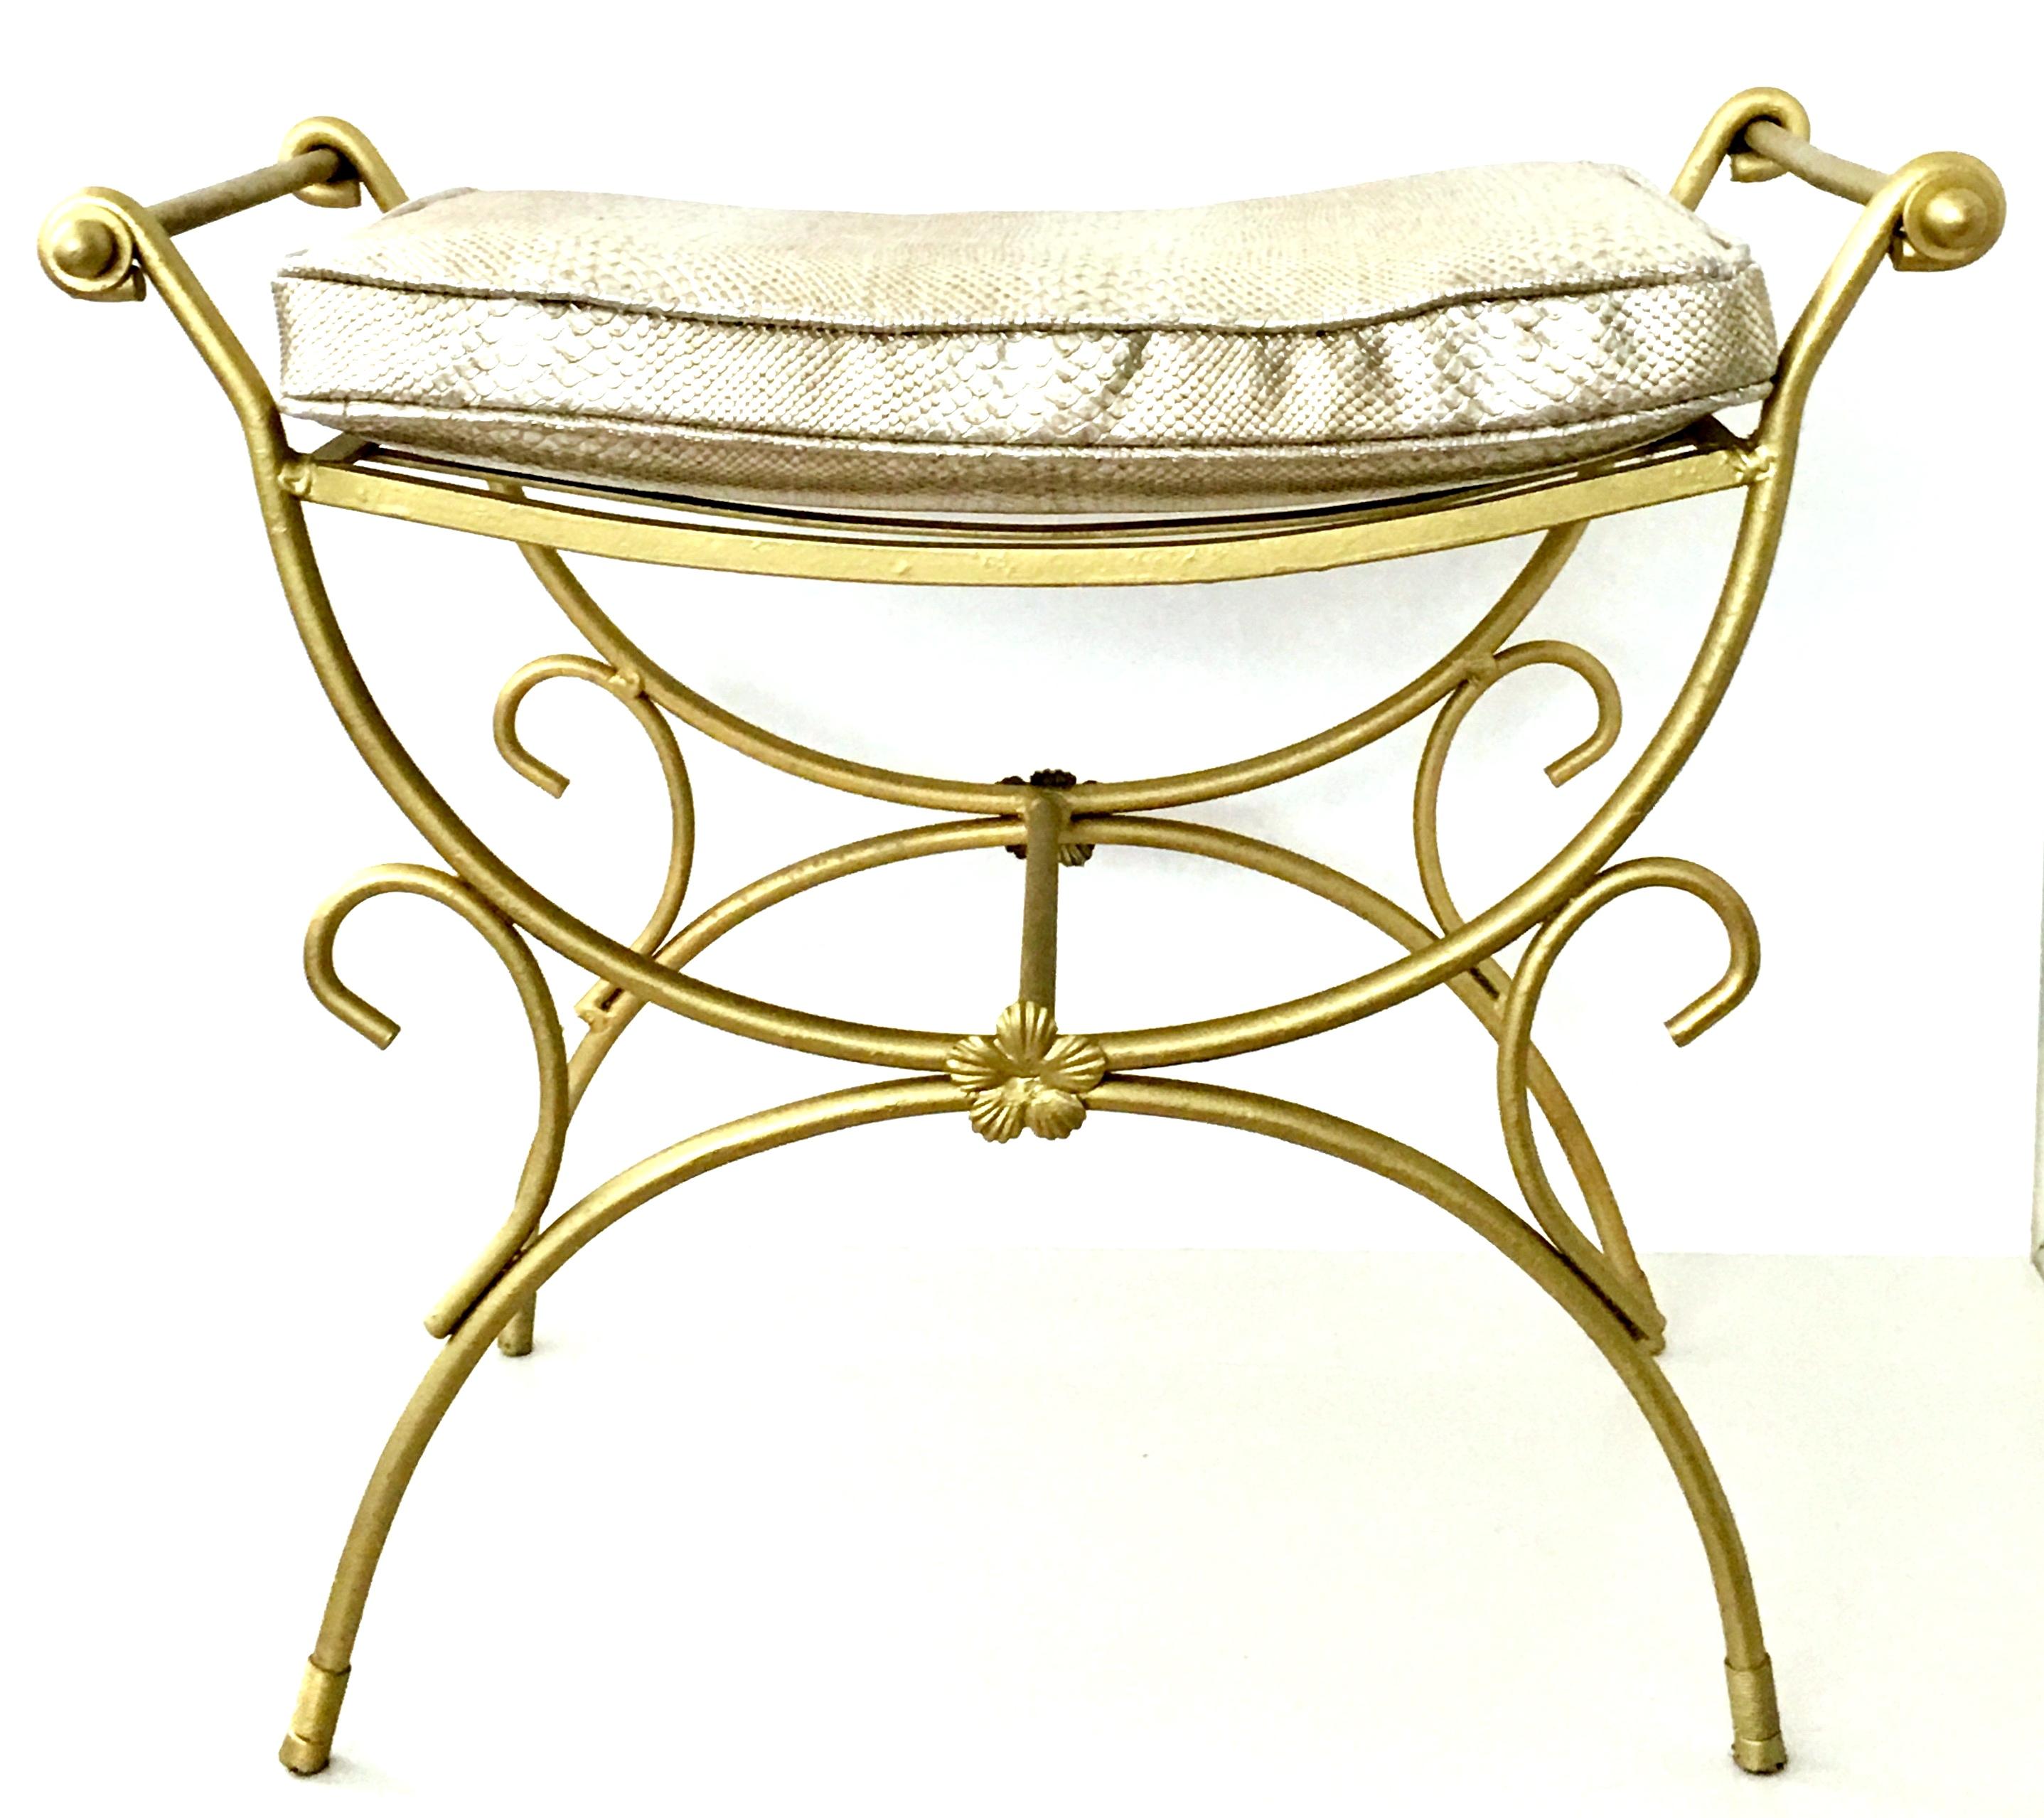 Mid-20th Century Hollywood Regency gold iron and faux python cushion bench. This gold metallic painted wrought iron bench features flat iron support straps across the seat. A newly fabricated 2